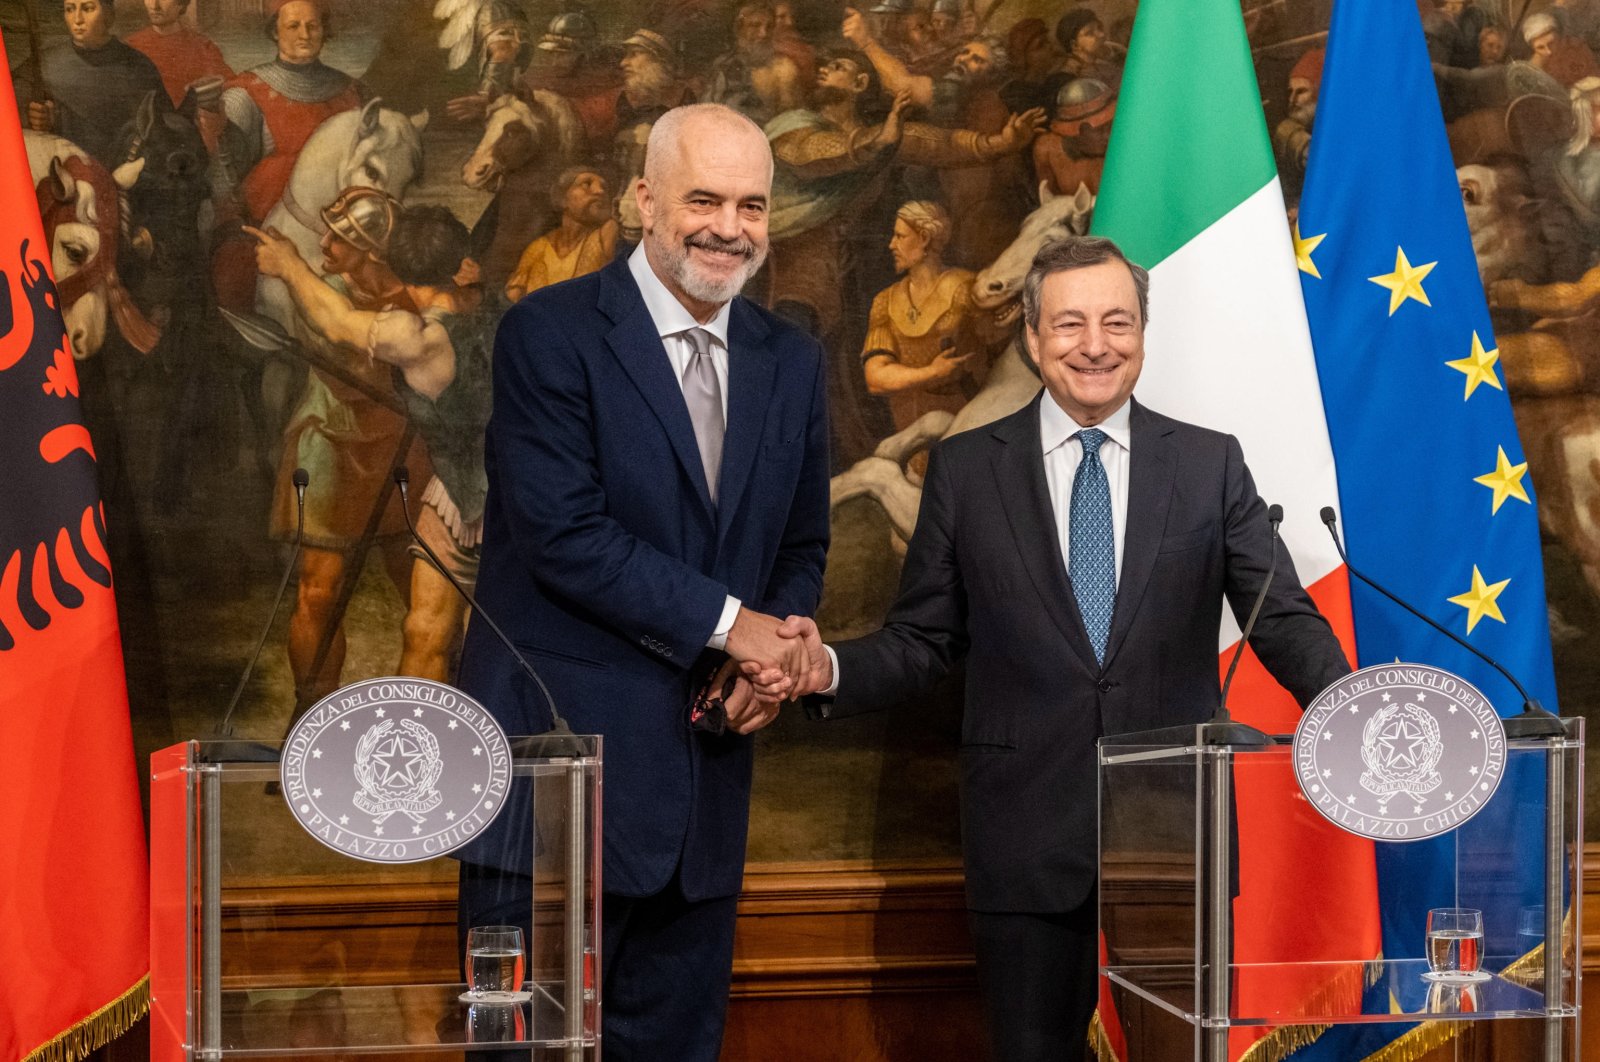 Italian Prime Minister Mario Draghi (R) and his Albanian counterpart Edi Rama (L) shake hands during a joint press conference following their meeting at Chigi Palace in Rome, Italy, Nov. 17, 2021.  (EPA Photo)